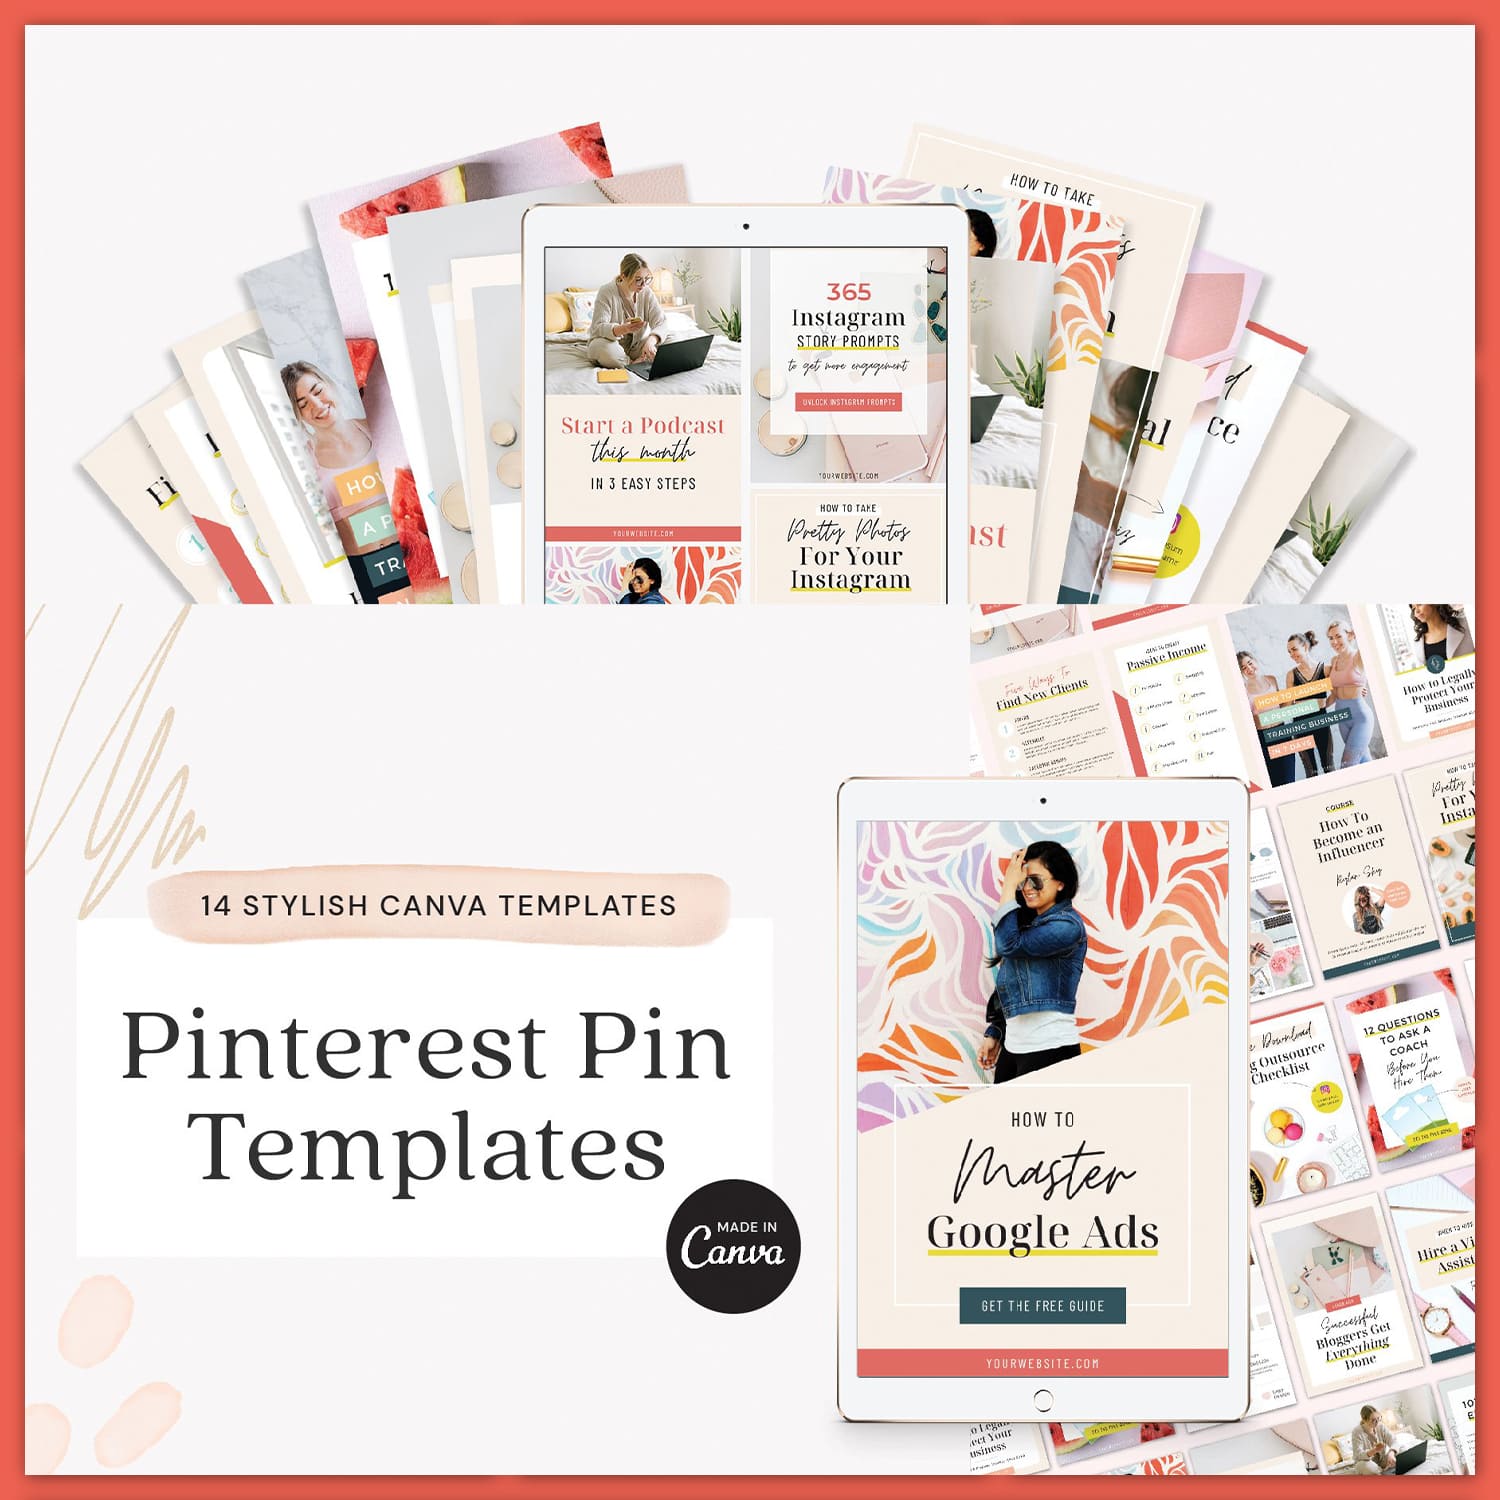 Pinterest Pin Template for Canva cover image.